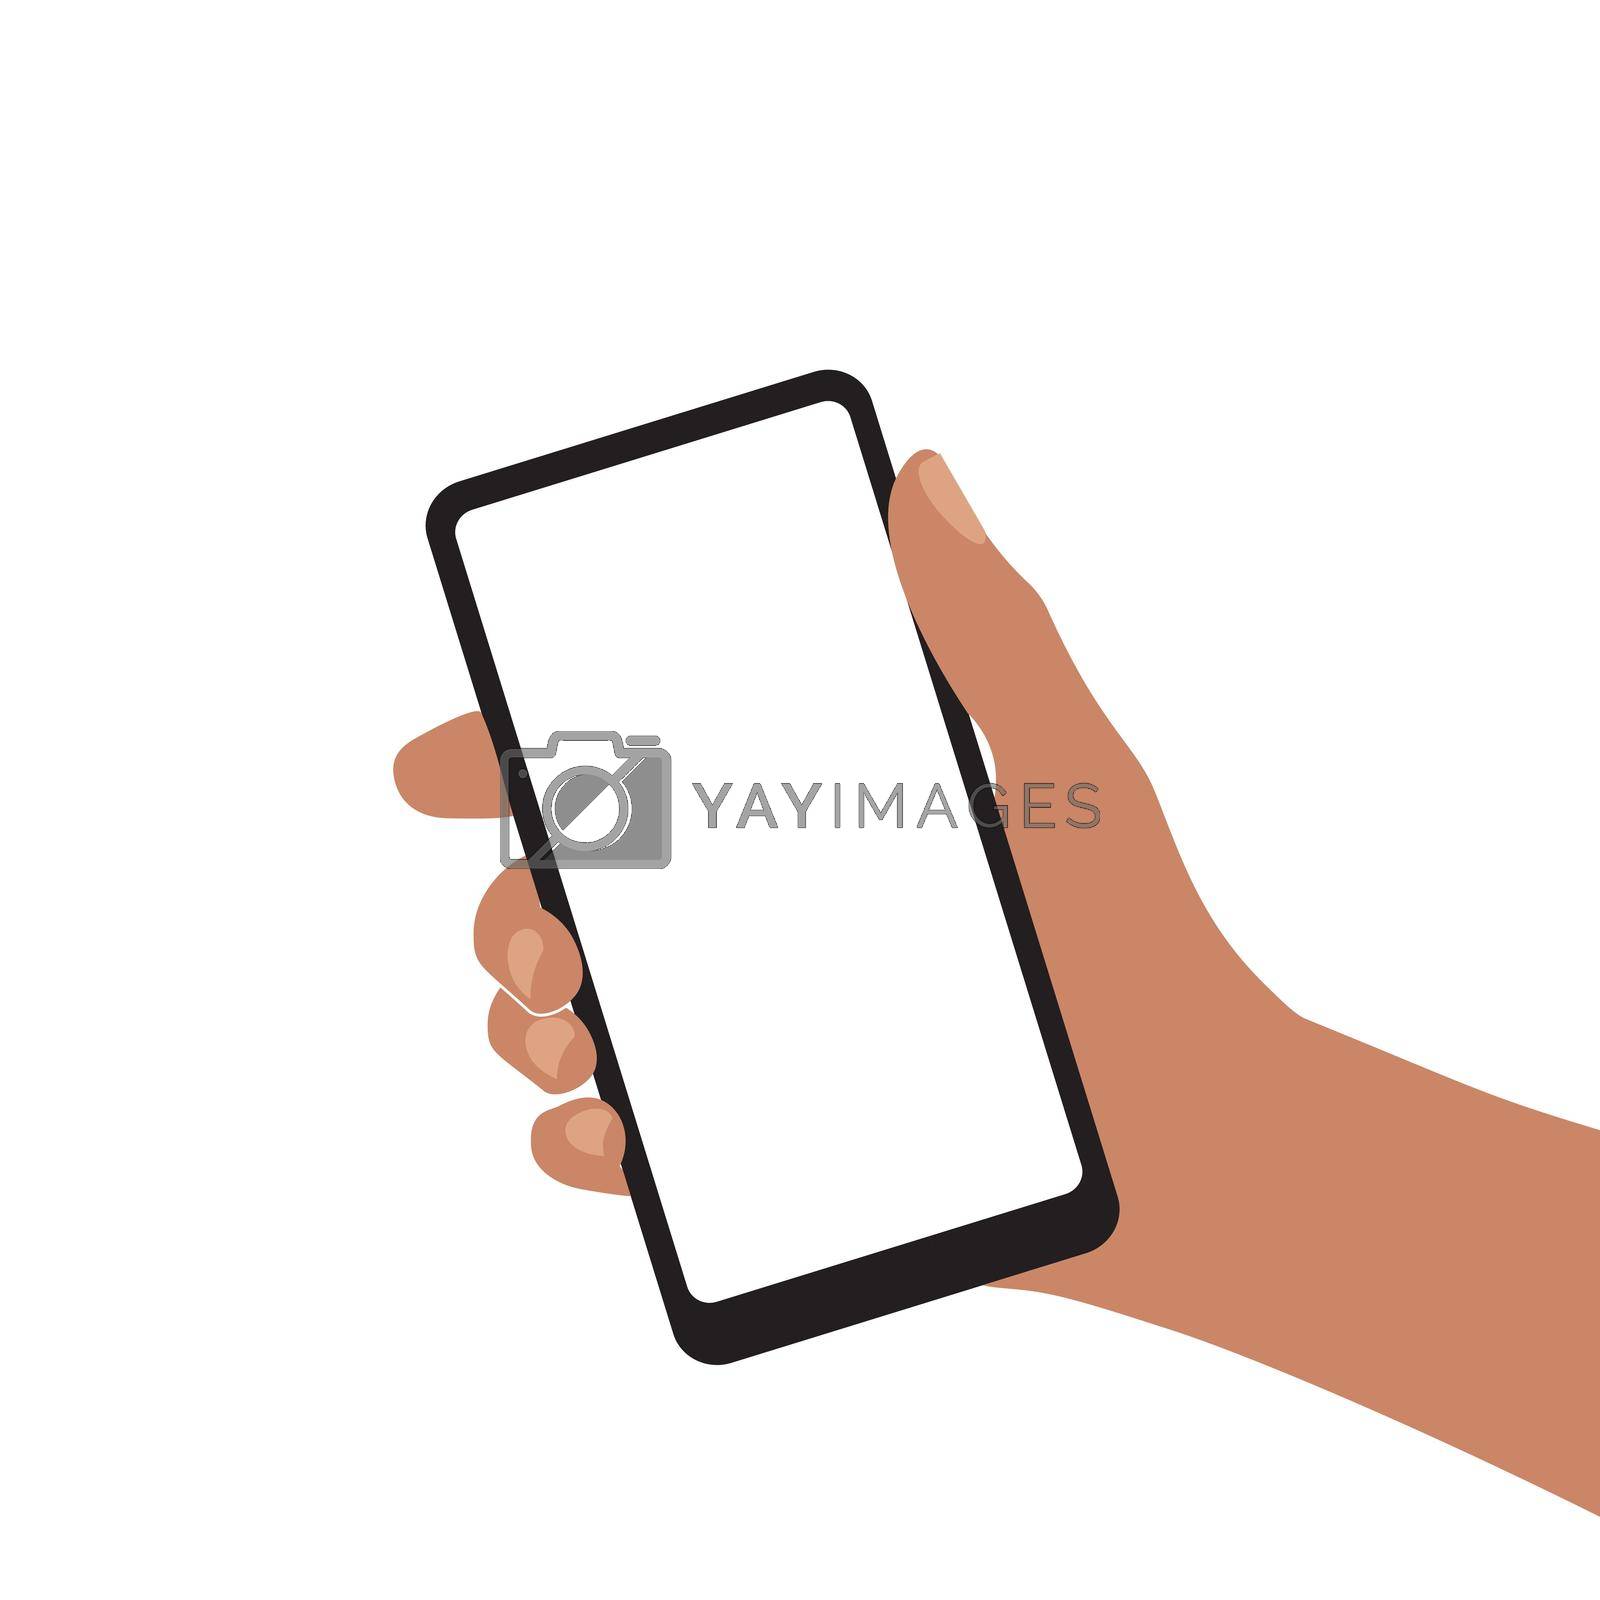 Royalty free image of Smartphone in hand by GALA_art